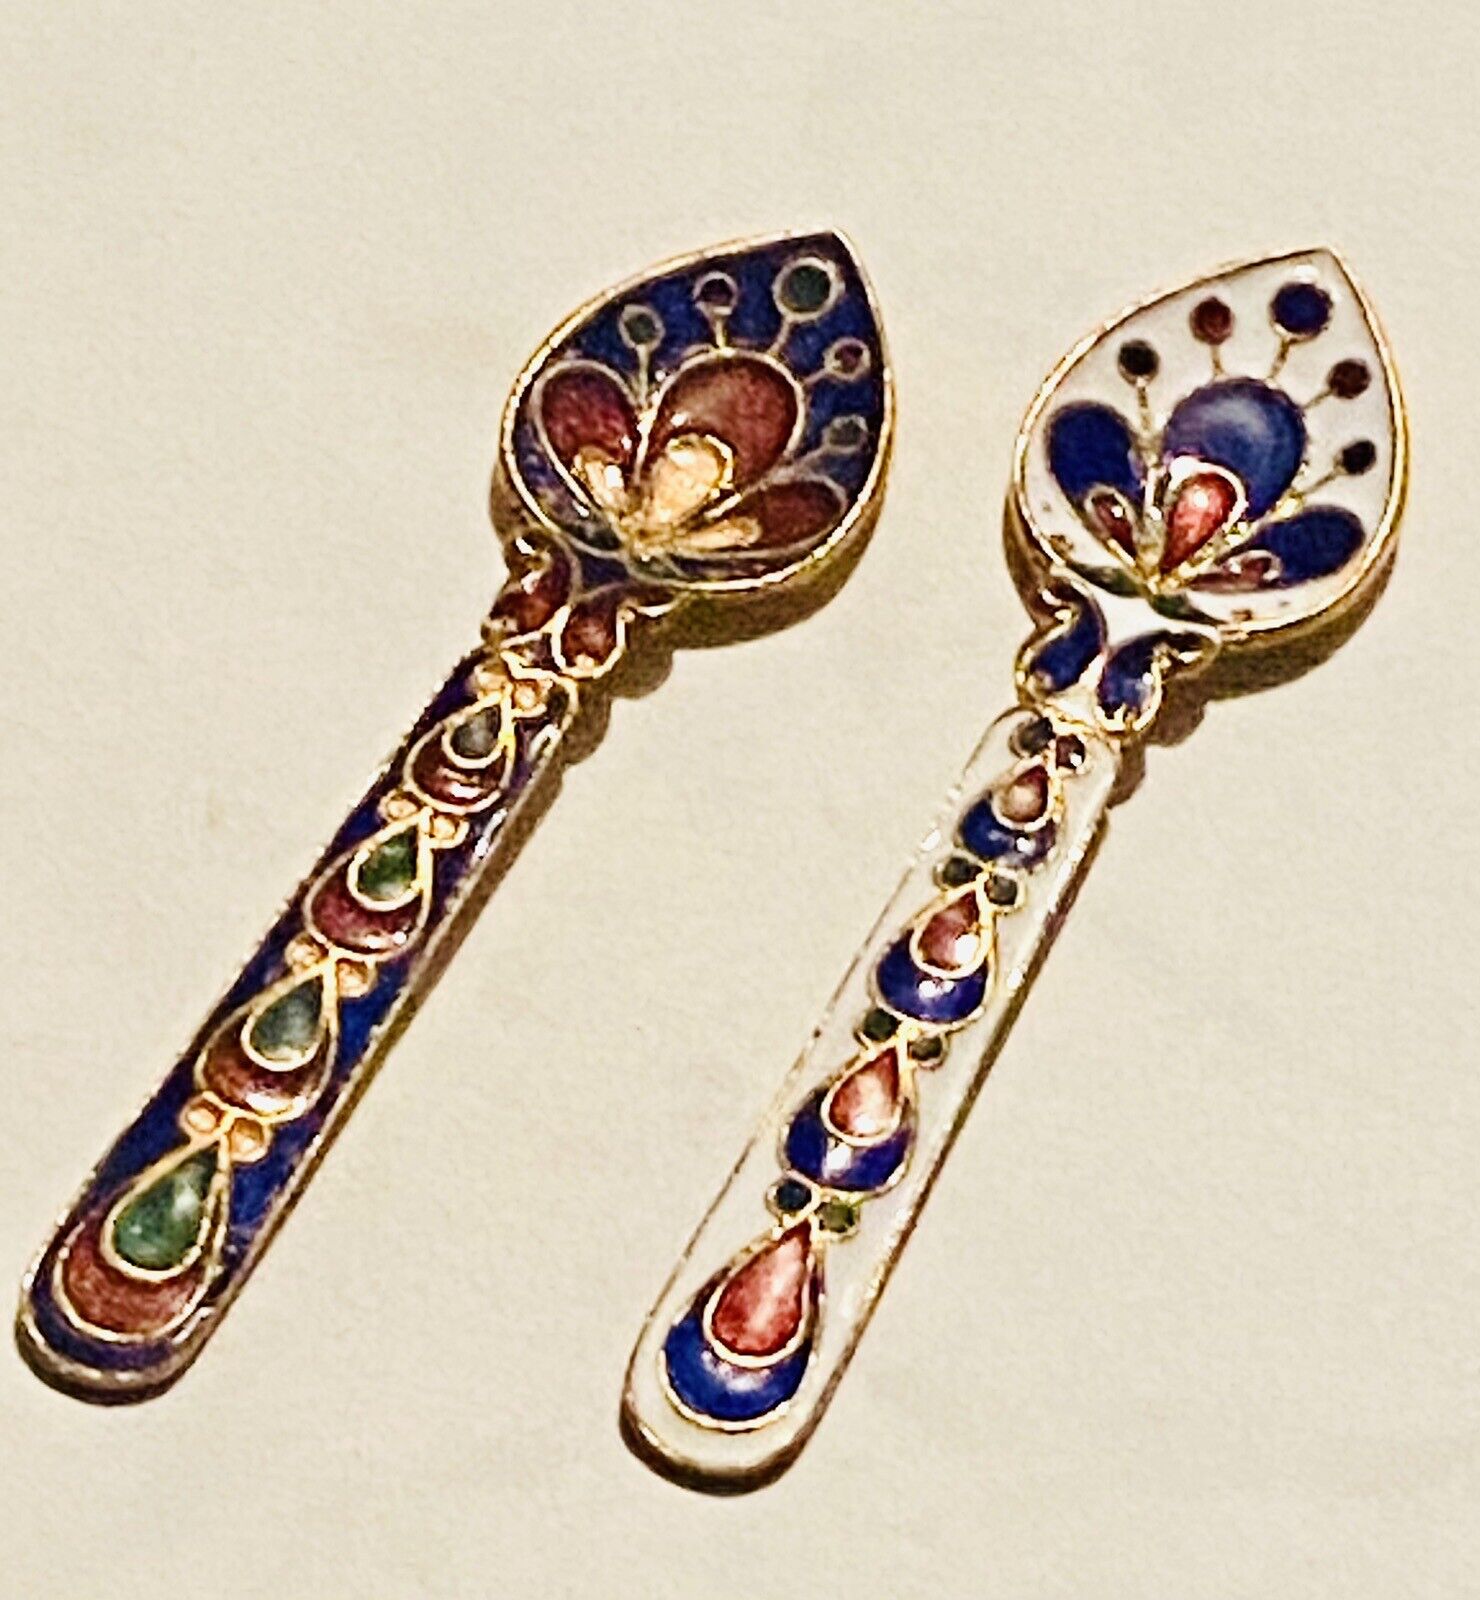 VTG Lovely Set Of 2 Enamel Cloisonné Over Copper W/Orig Tags Small Spoons